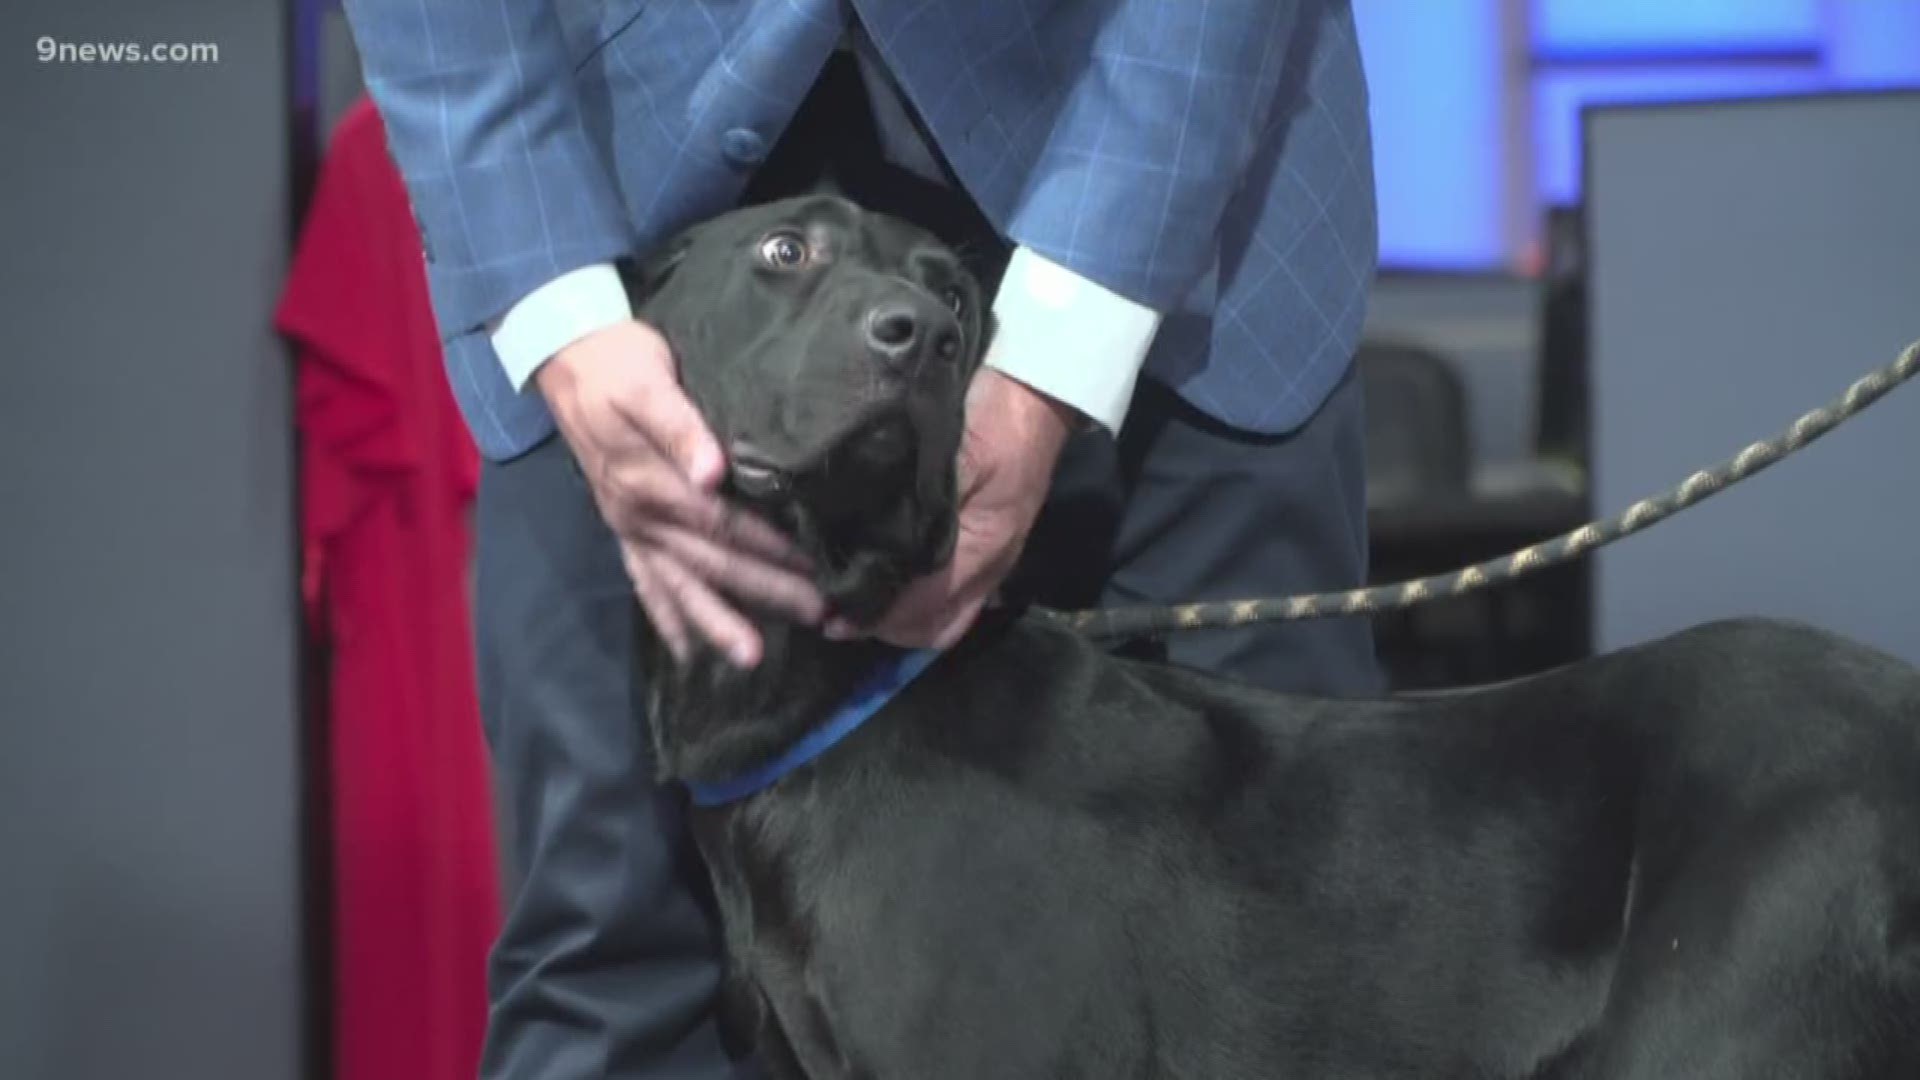 Ducky is in search of a forever home! You can learn more about him or adopt him by reaching out to the Humane Society of the South Platte Valley.